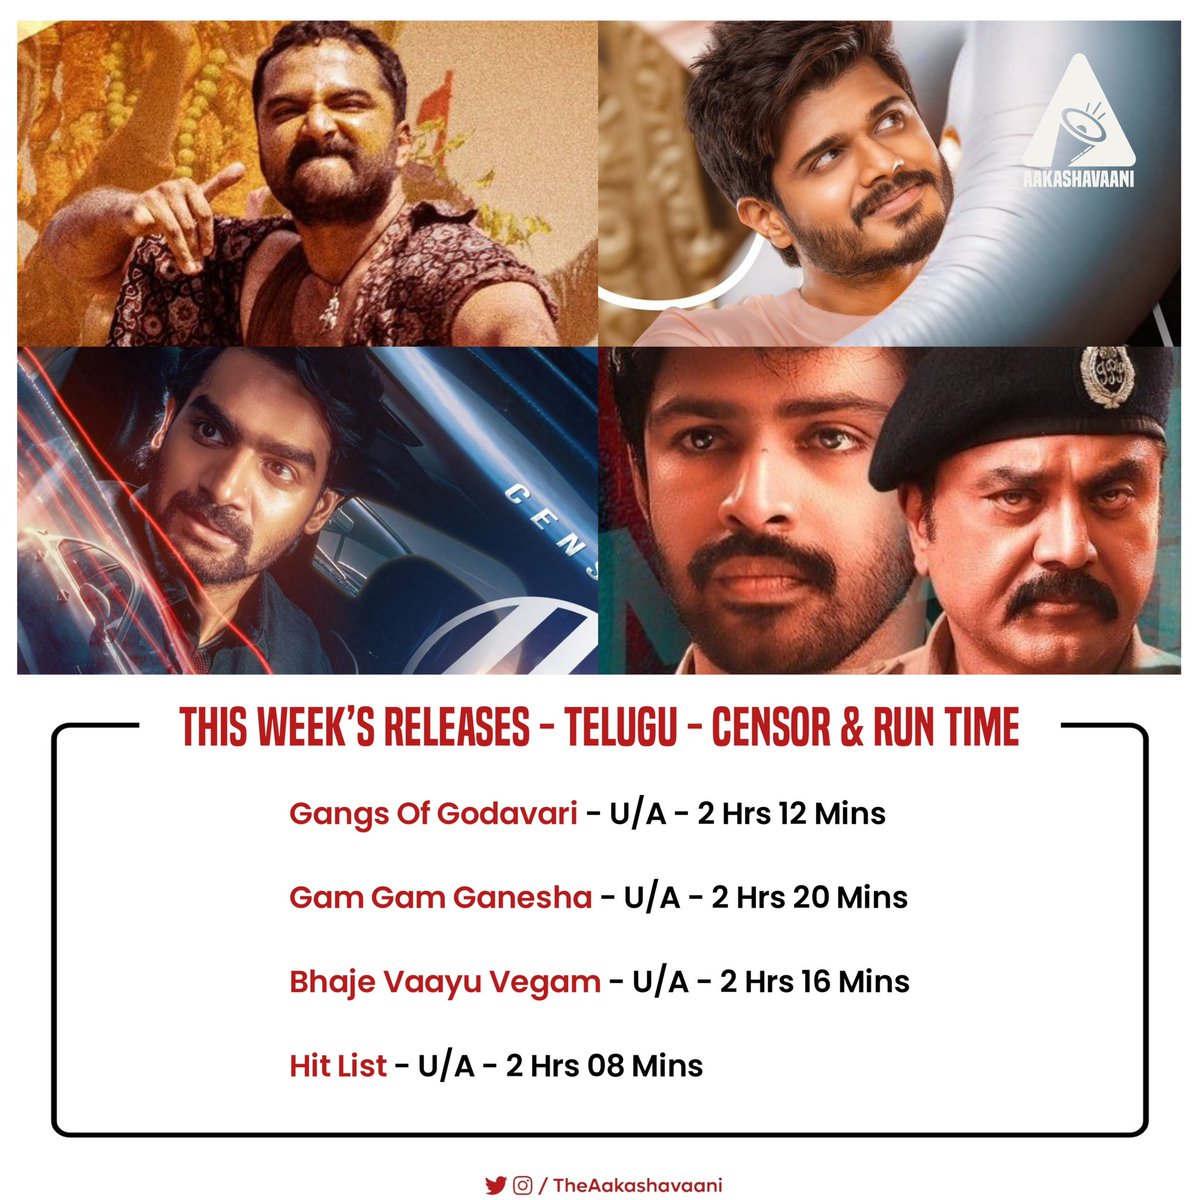 This Week’s Theatrical Releases - Telugu